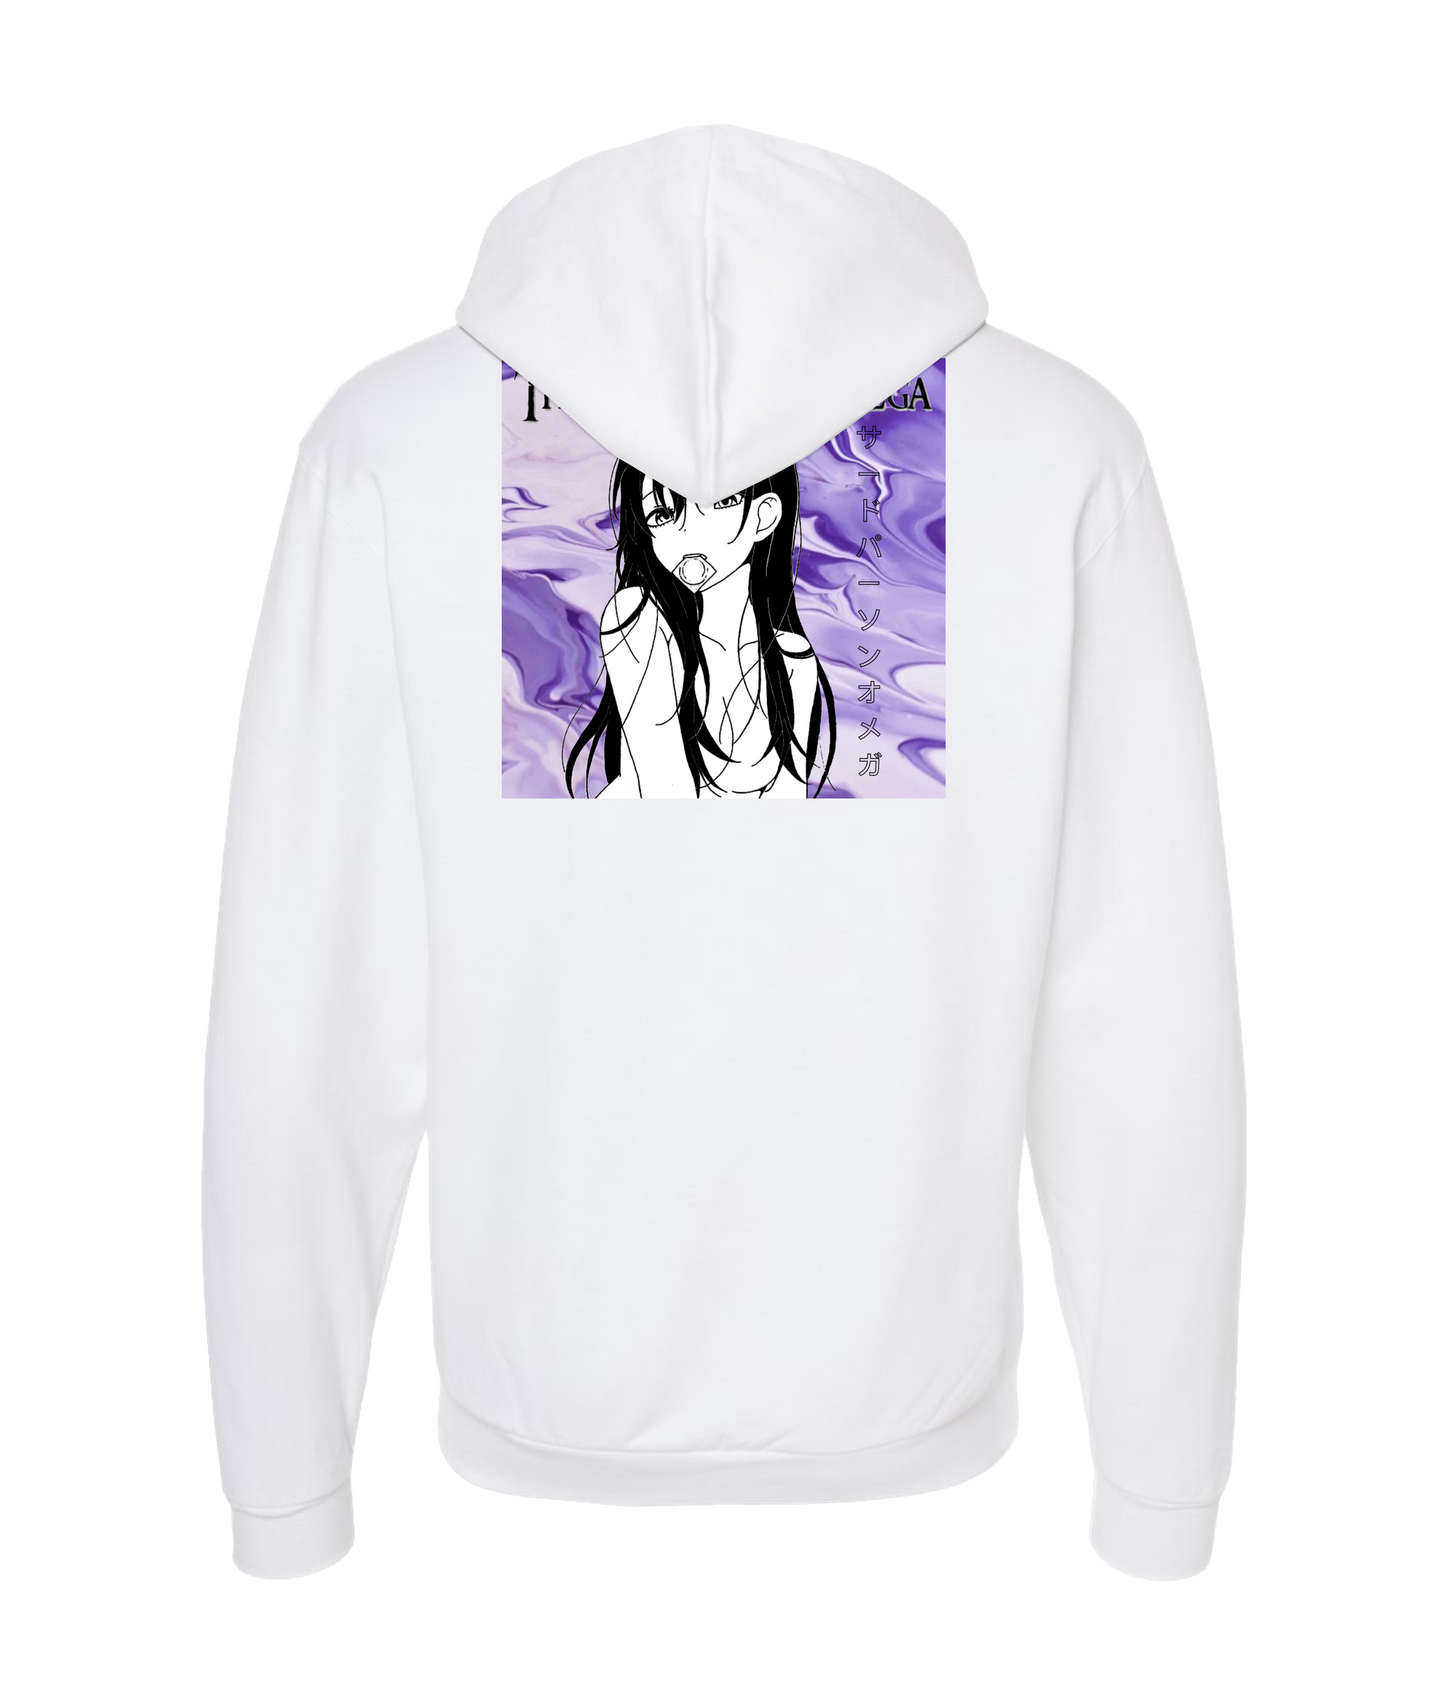 Third Person Omega - ANIME GIRL - White Zip Up Hoodie